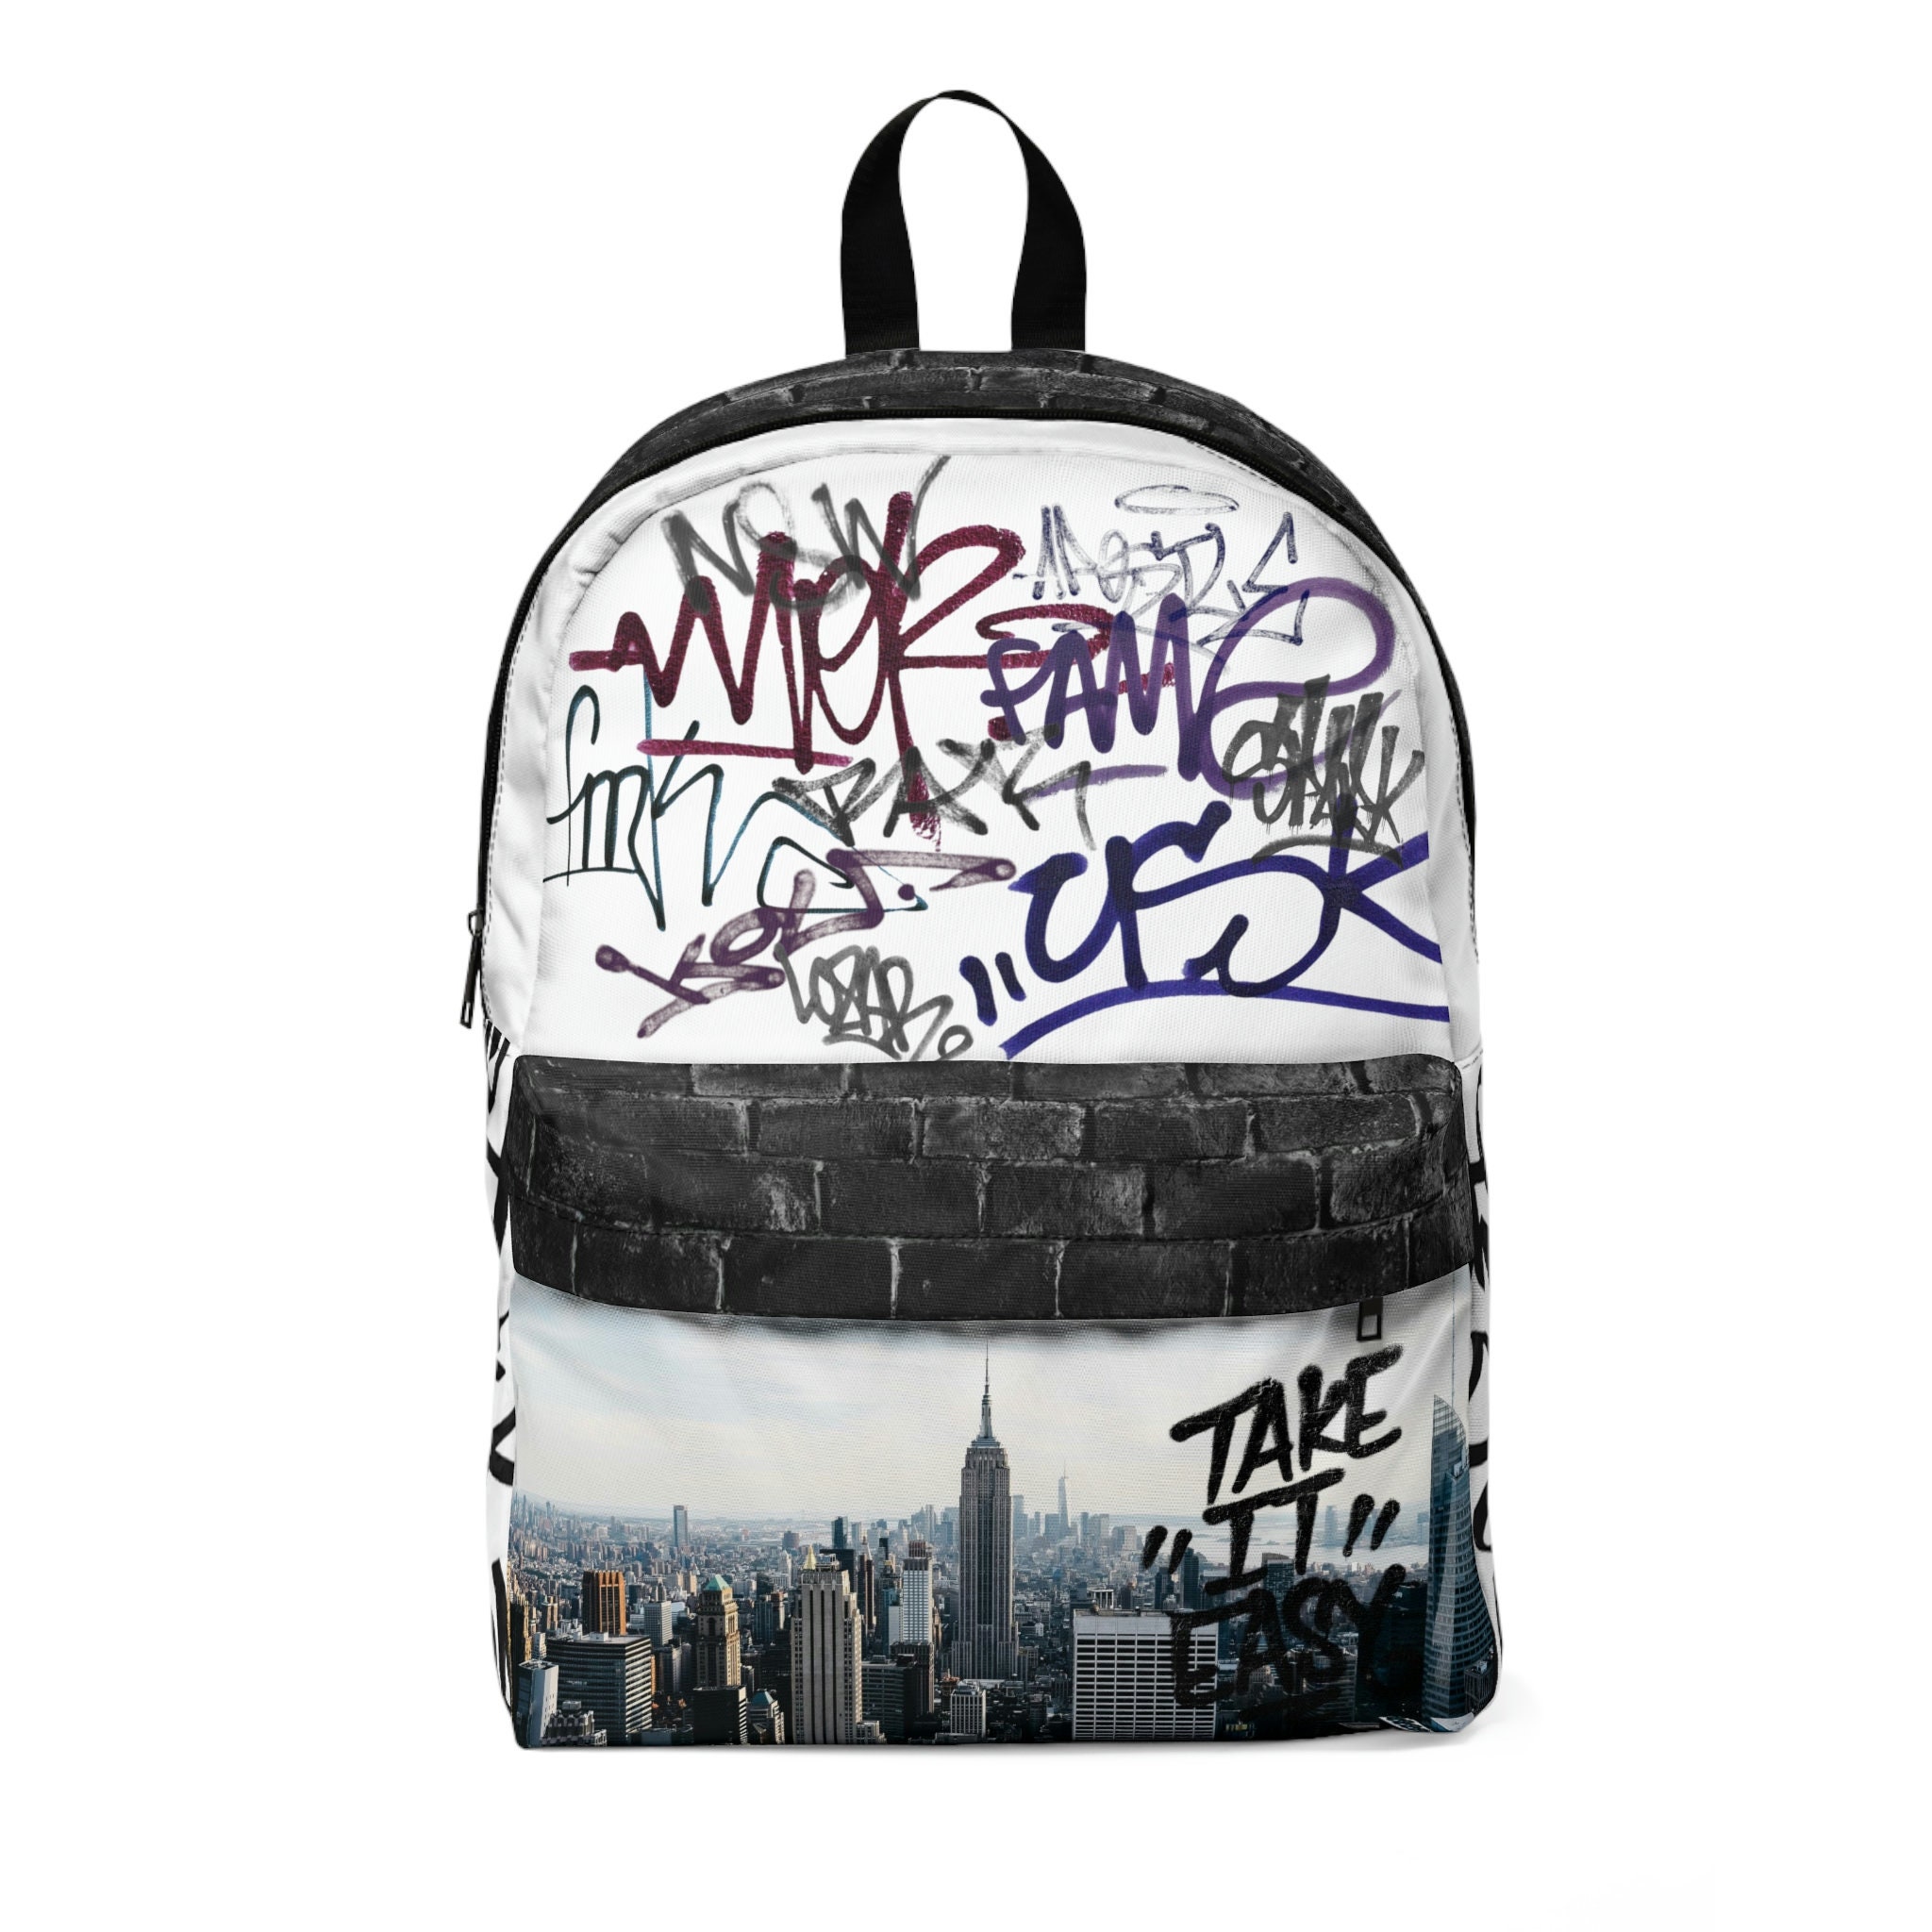 Coikll Graffiti Patterns and Spray Paint Ink Elements Sports Gym Bag with  Waterproof Dry Wet Pocket, Travel Duffel Bag for Women Men，Workout Bag Fits